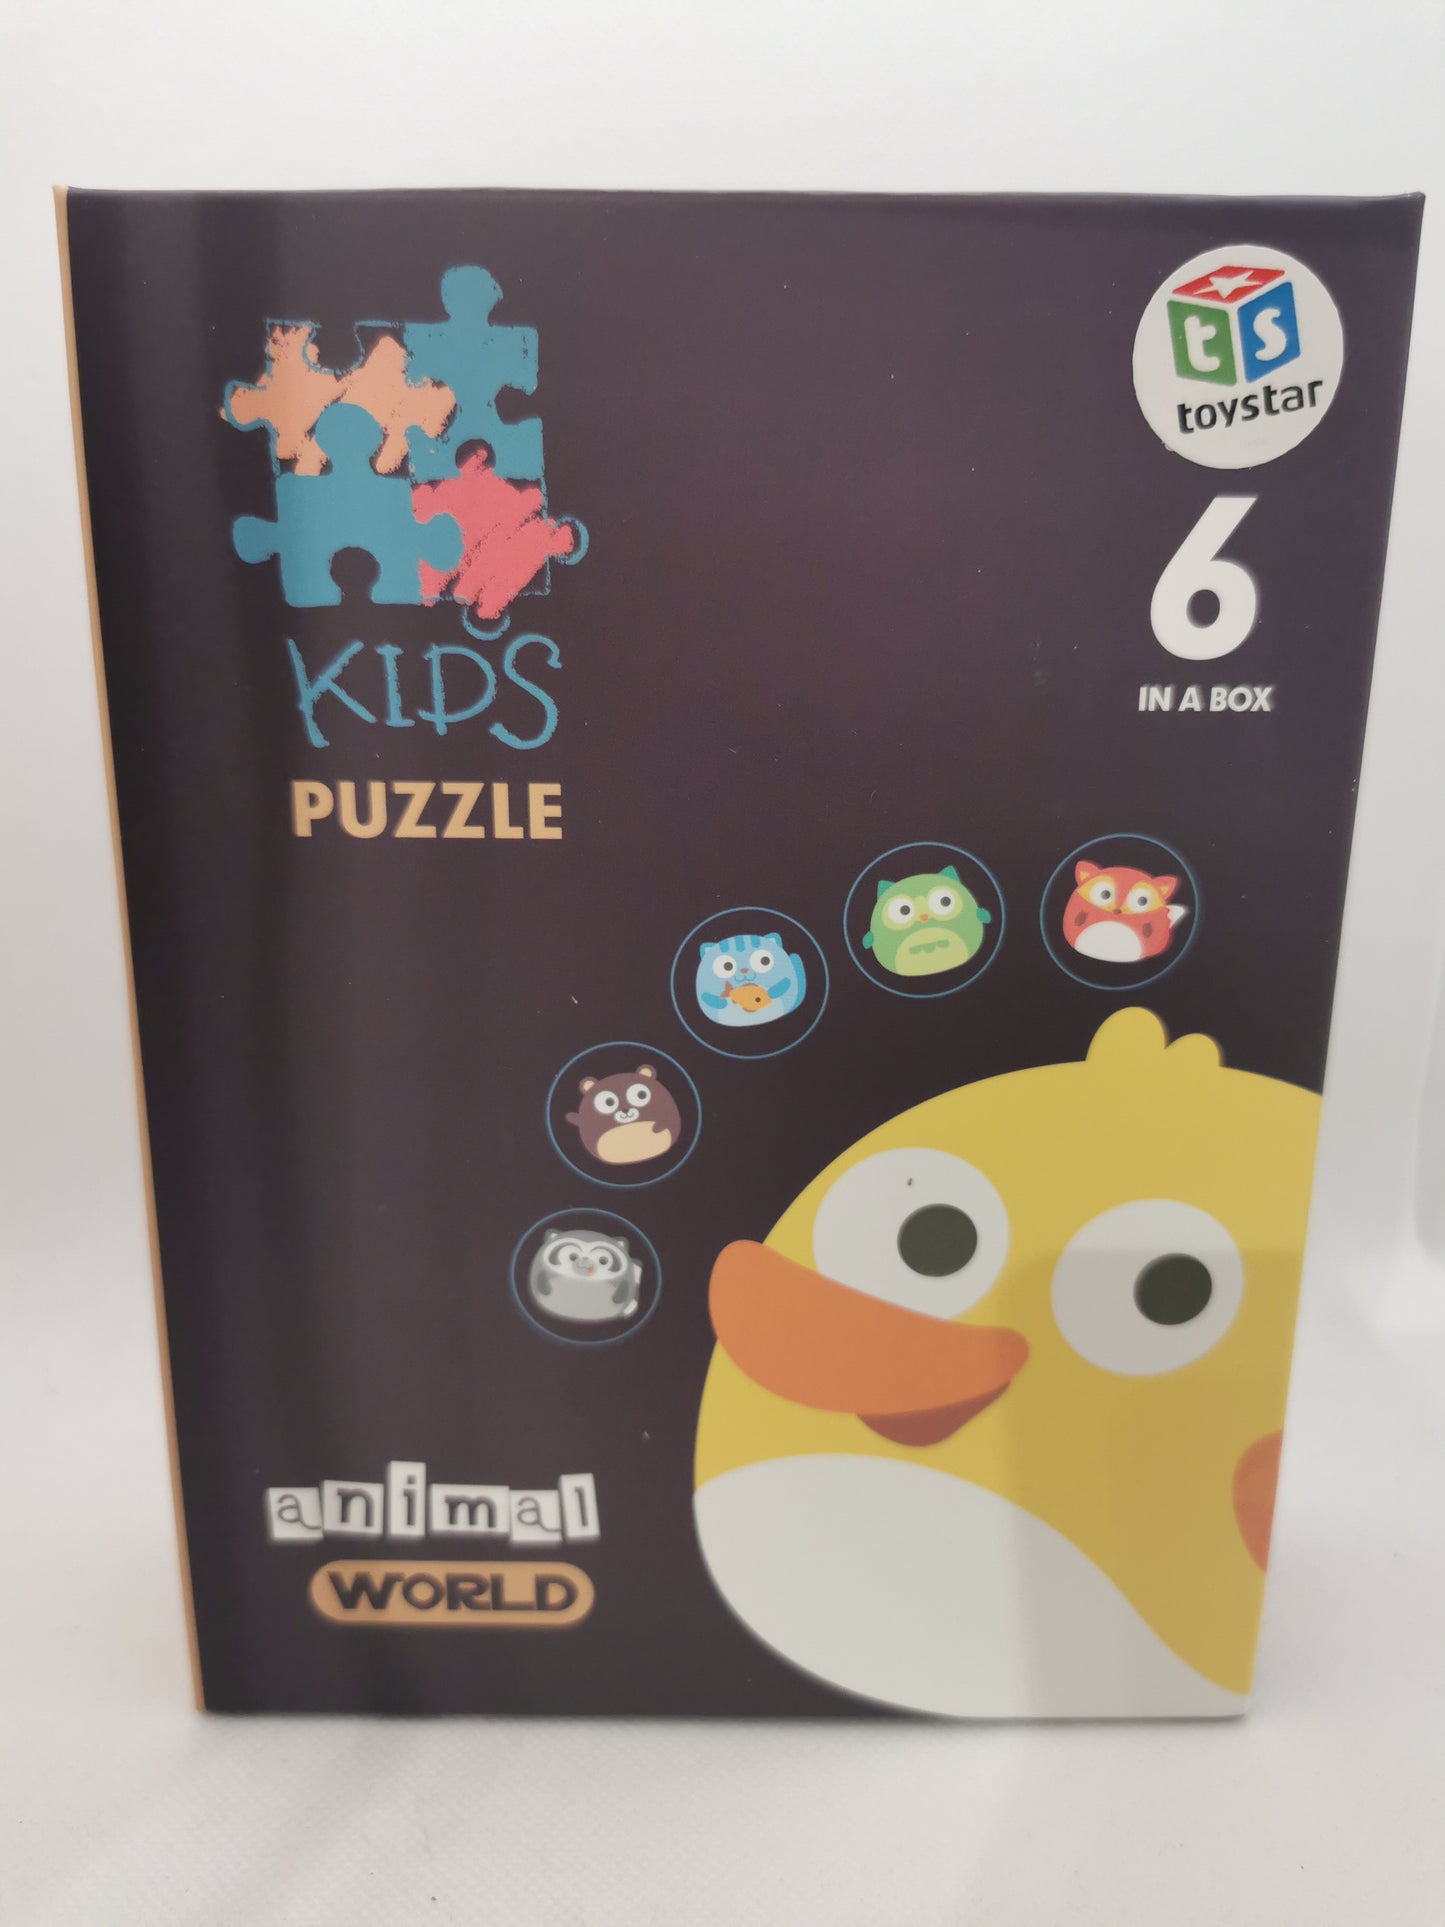 Kids Puzzle Animal World 6 in a Box